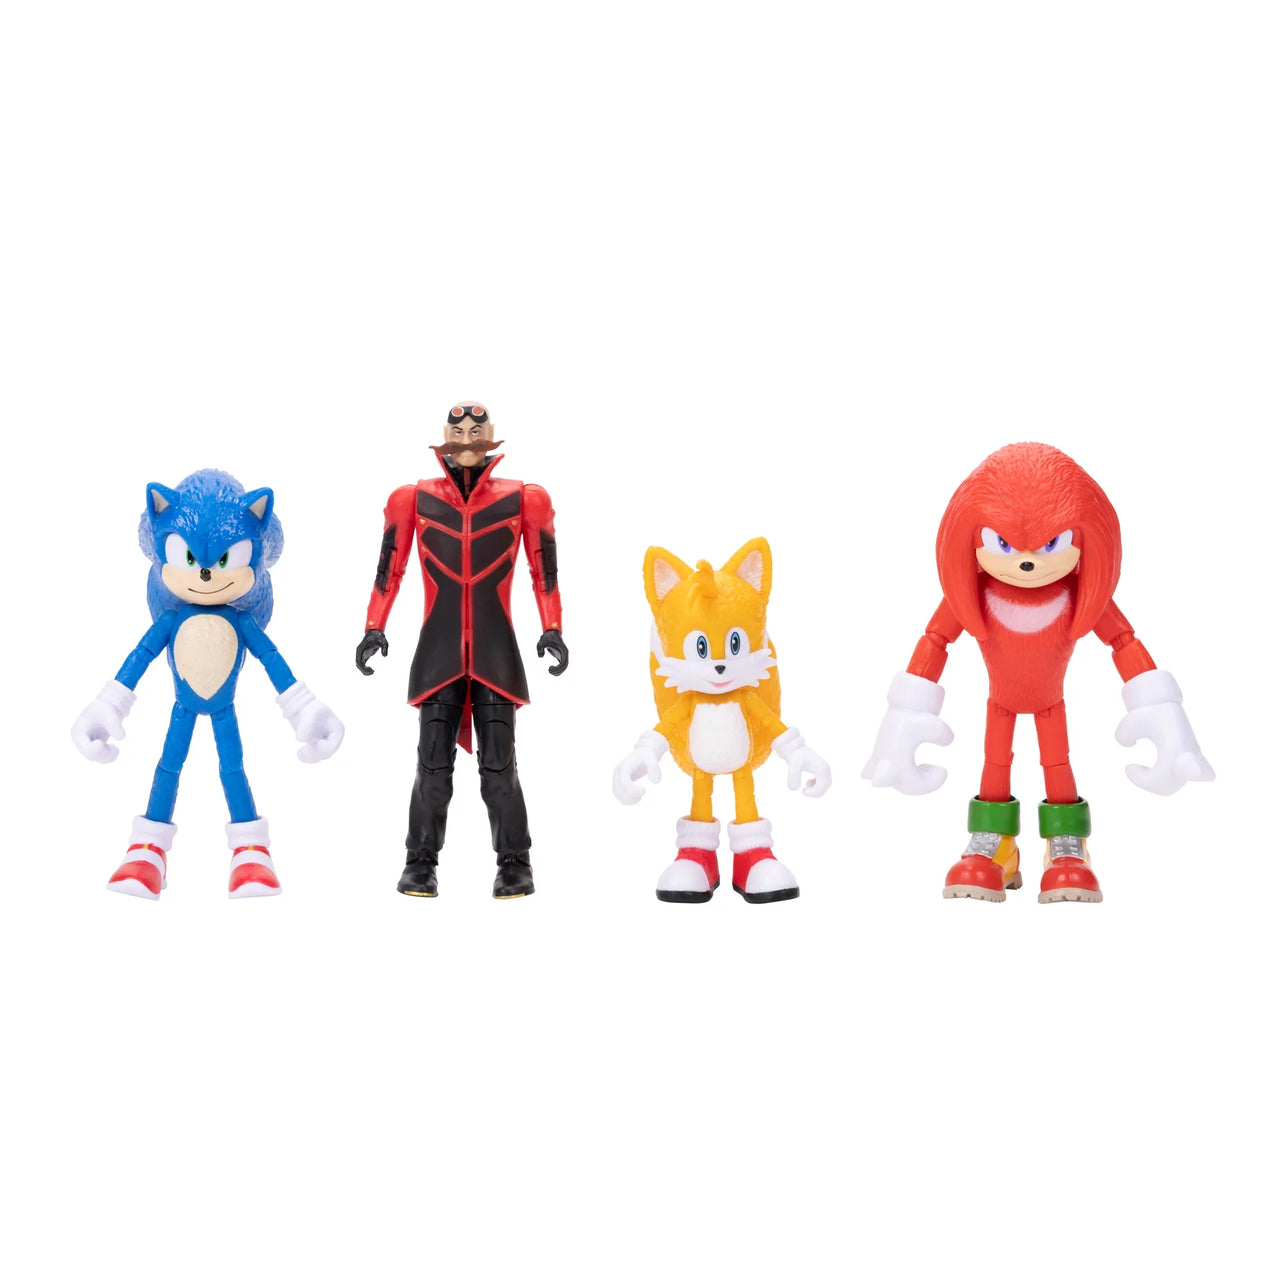 Sonic The Hedgehog 4" Articulated Figure with Accessories Assortment Master Kids Company Sonic 